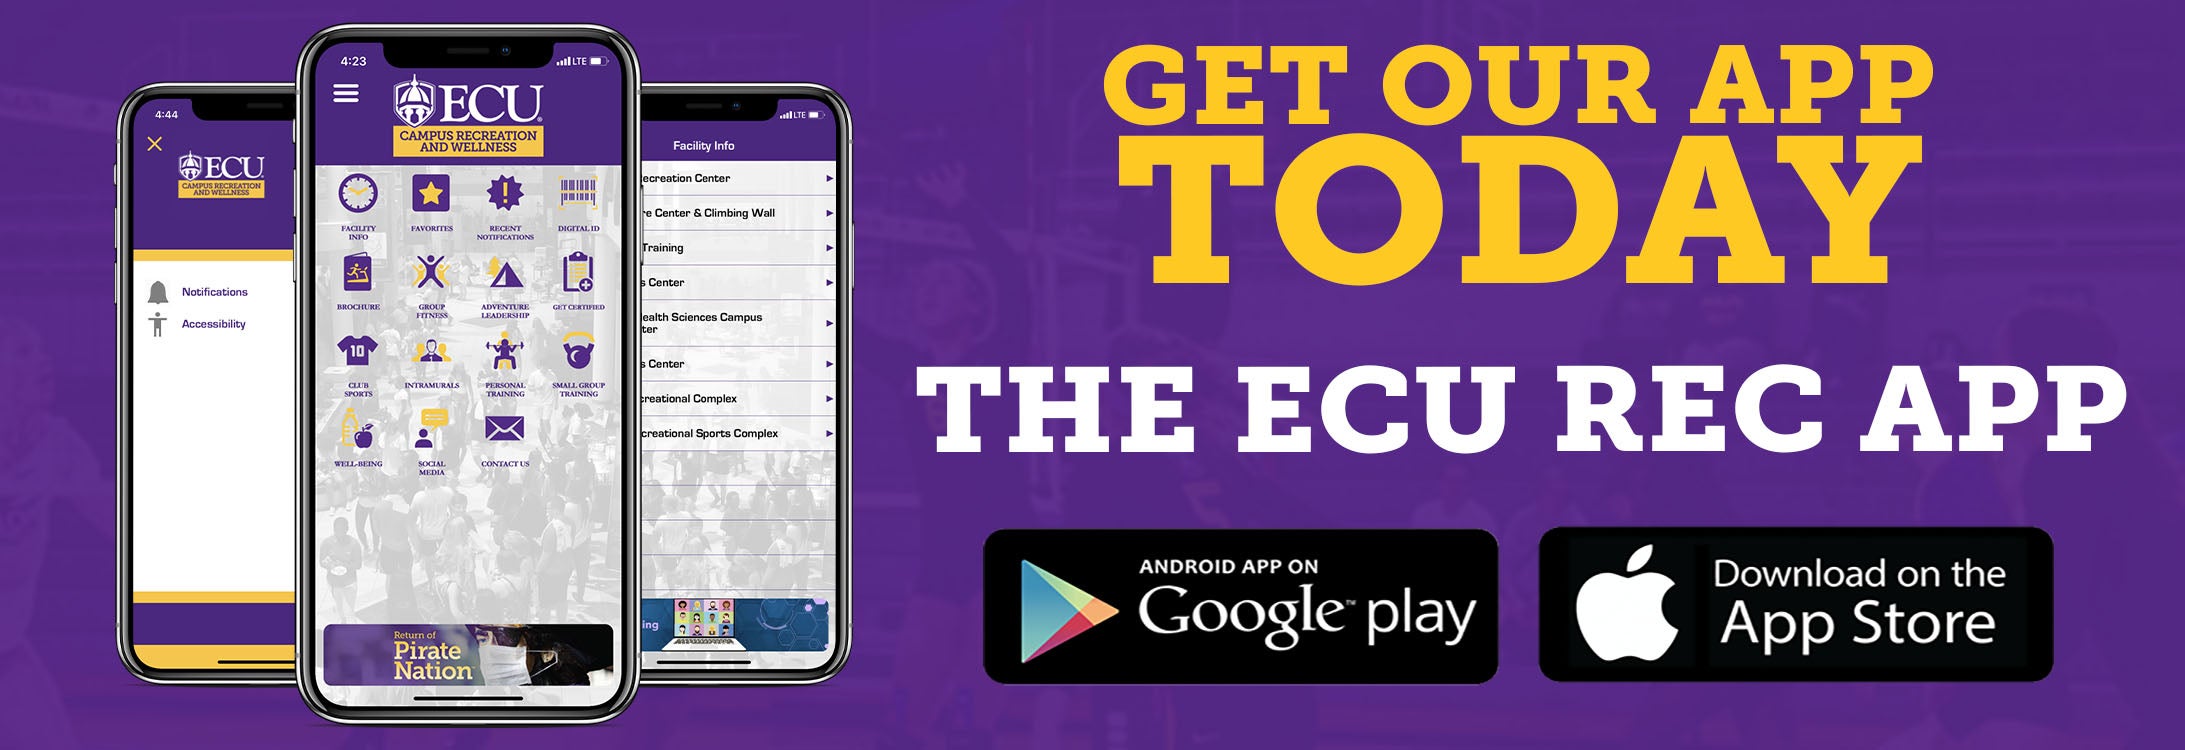 Get our App Today - The ECU Rec App - Android App on Google Playstore and Download on the App Store